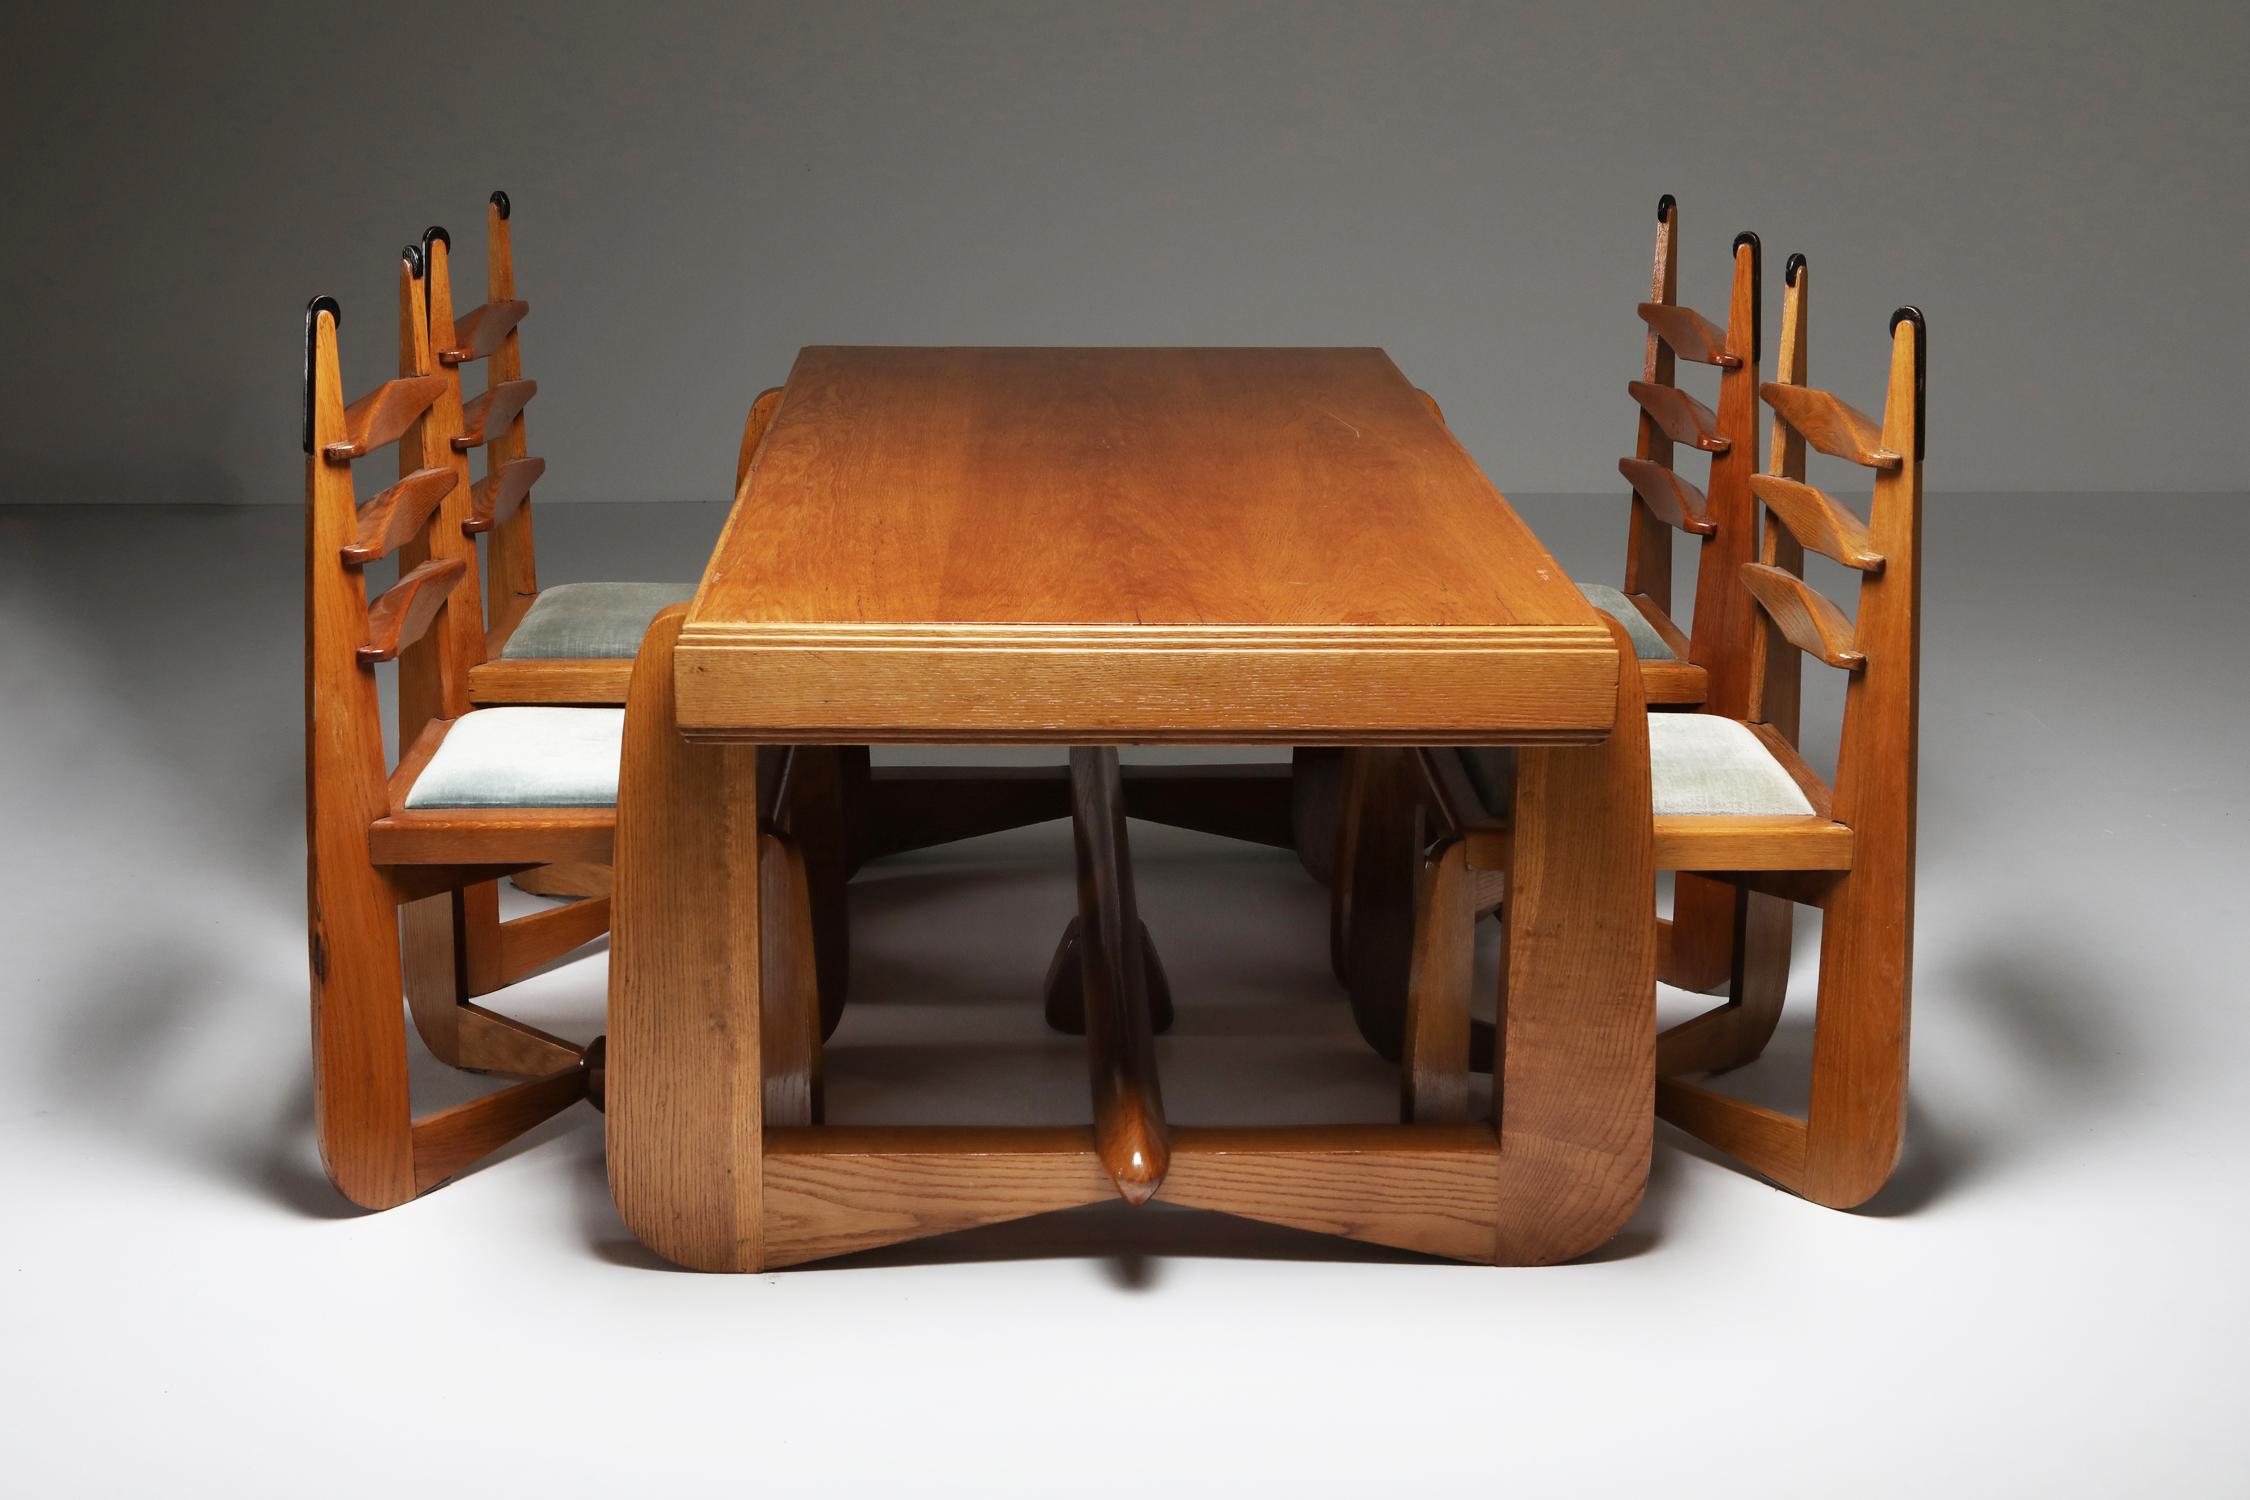 Art Deco era Dutch dining room set in the style of Kramer and Hildo Krop, Netherlands, 1930s

Amsterdam School table and chairs in solid oak, exuberant and sculptural.

The Amsterdam School (Dutch: Amsterdamse School) is a style of architecture